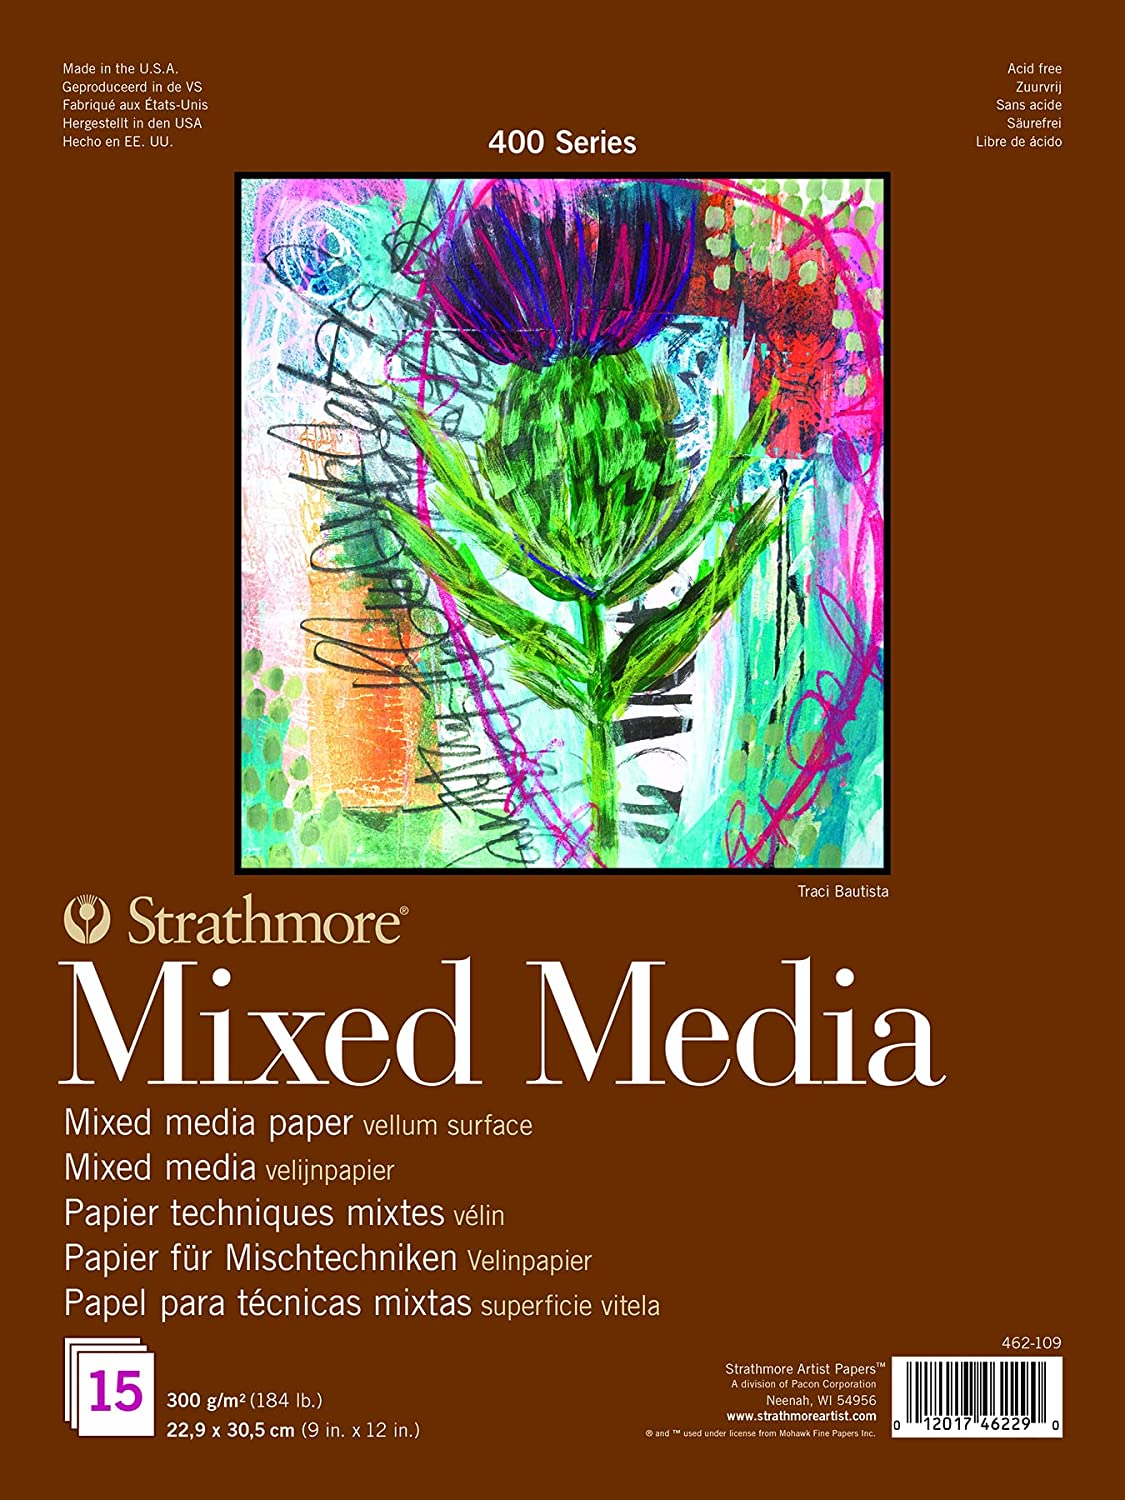 Canson Artist Series Mixed Media Paper, Wirebound Pad, 9x12 inches, 30  Sheets (138lb/224g) - Artist Paper for Adults and Students - Watercolor